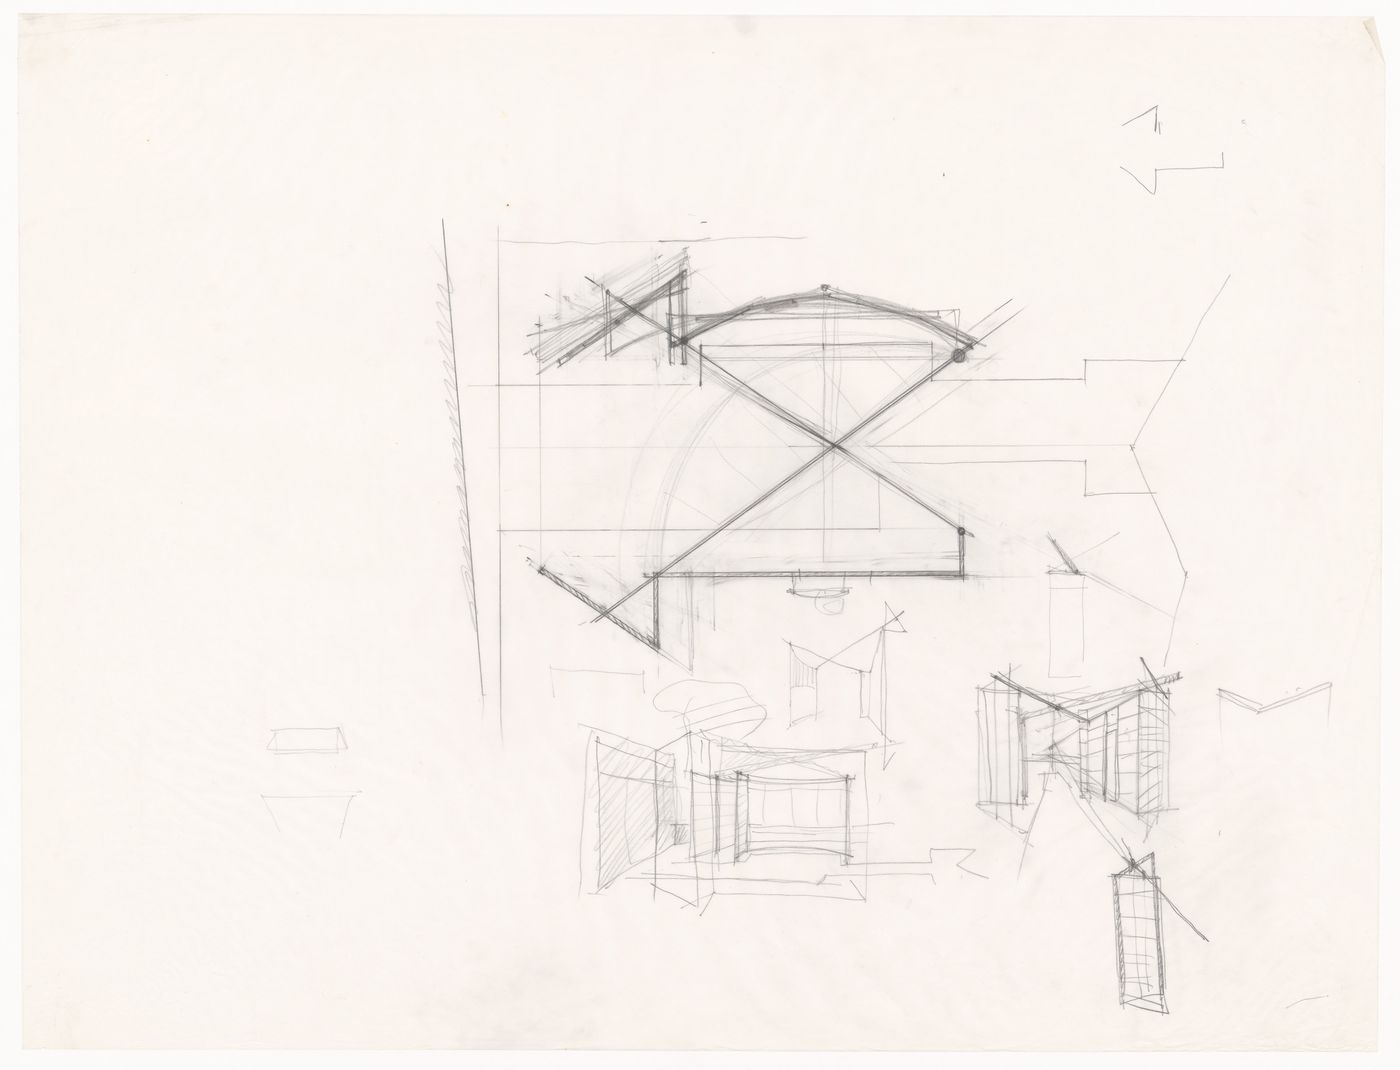 Plans and perspectives for Casa Frea, Milan, Italy